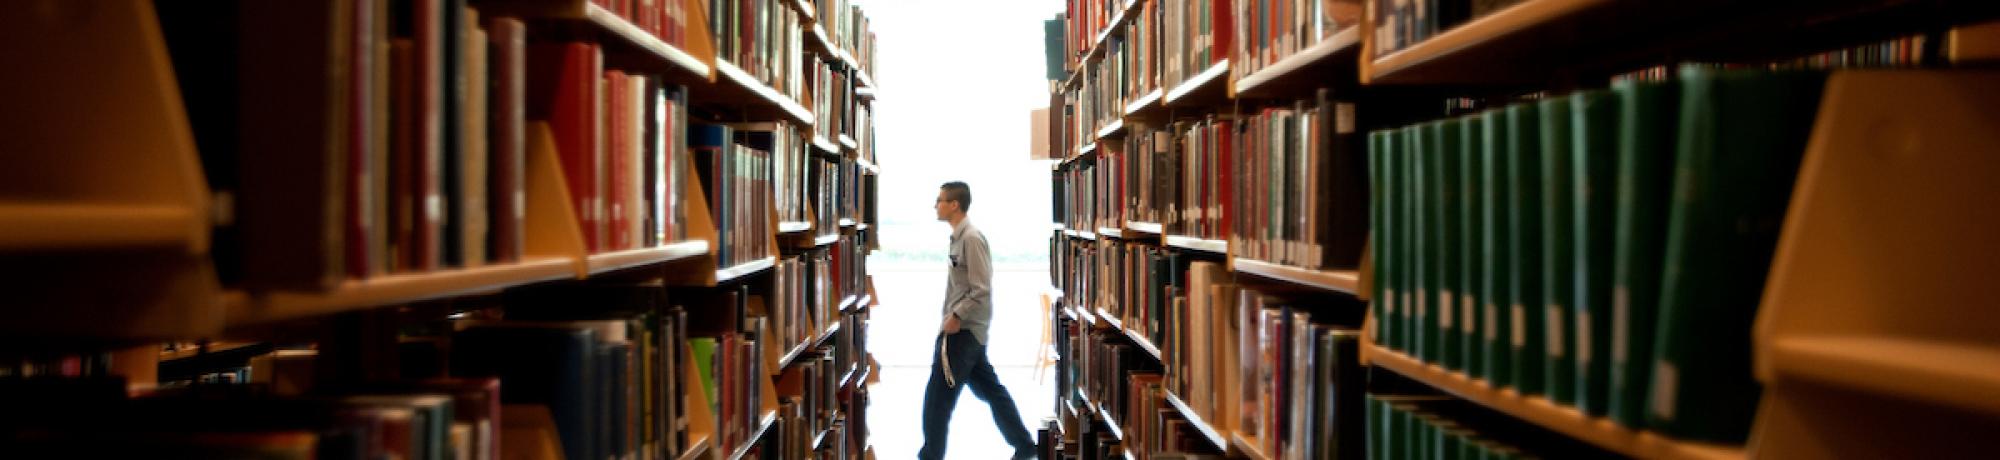 Students walk past aisles of books in  Shields Library on Wednesday October 8, 2014 at UC Davis.